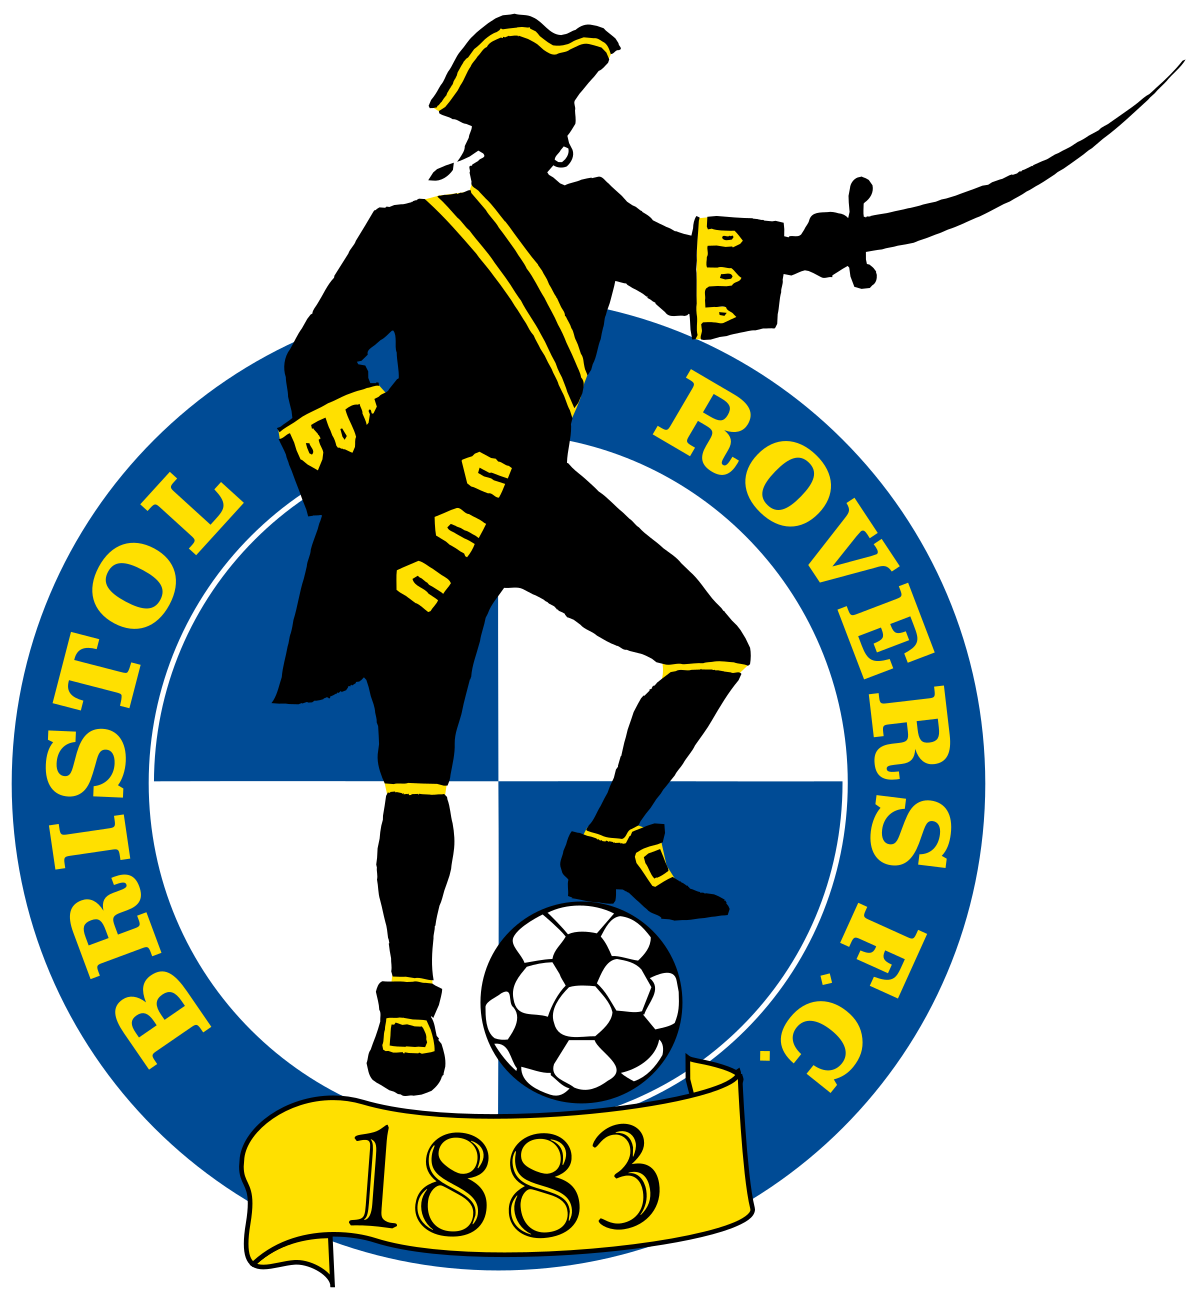 Breaking News:Bristol Rovers to confirm new manager possibly today